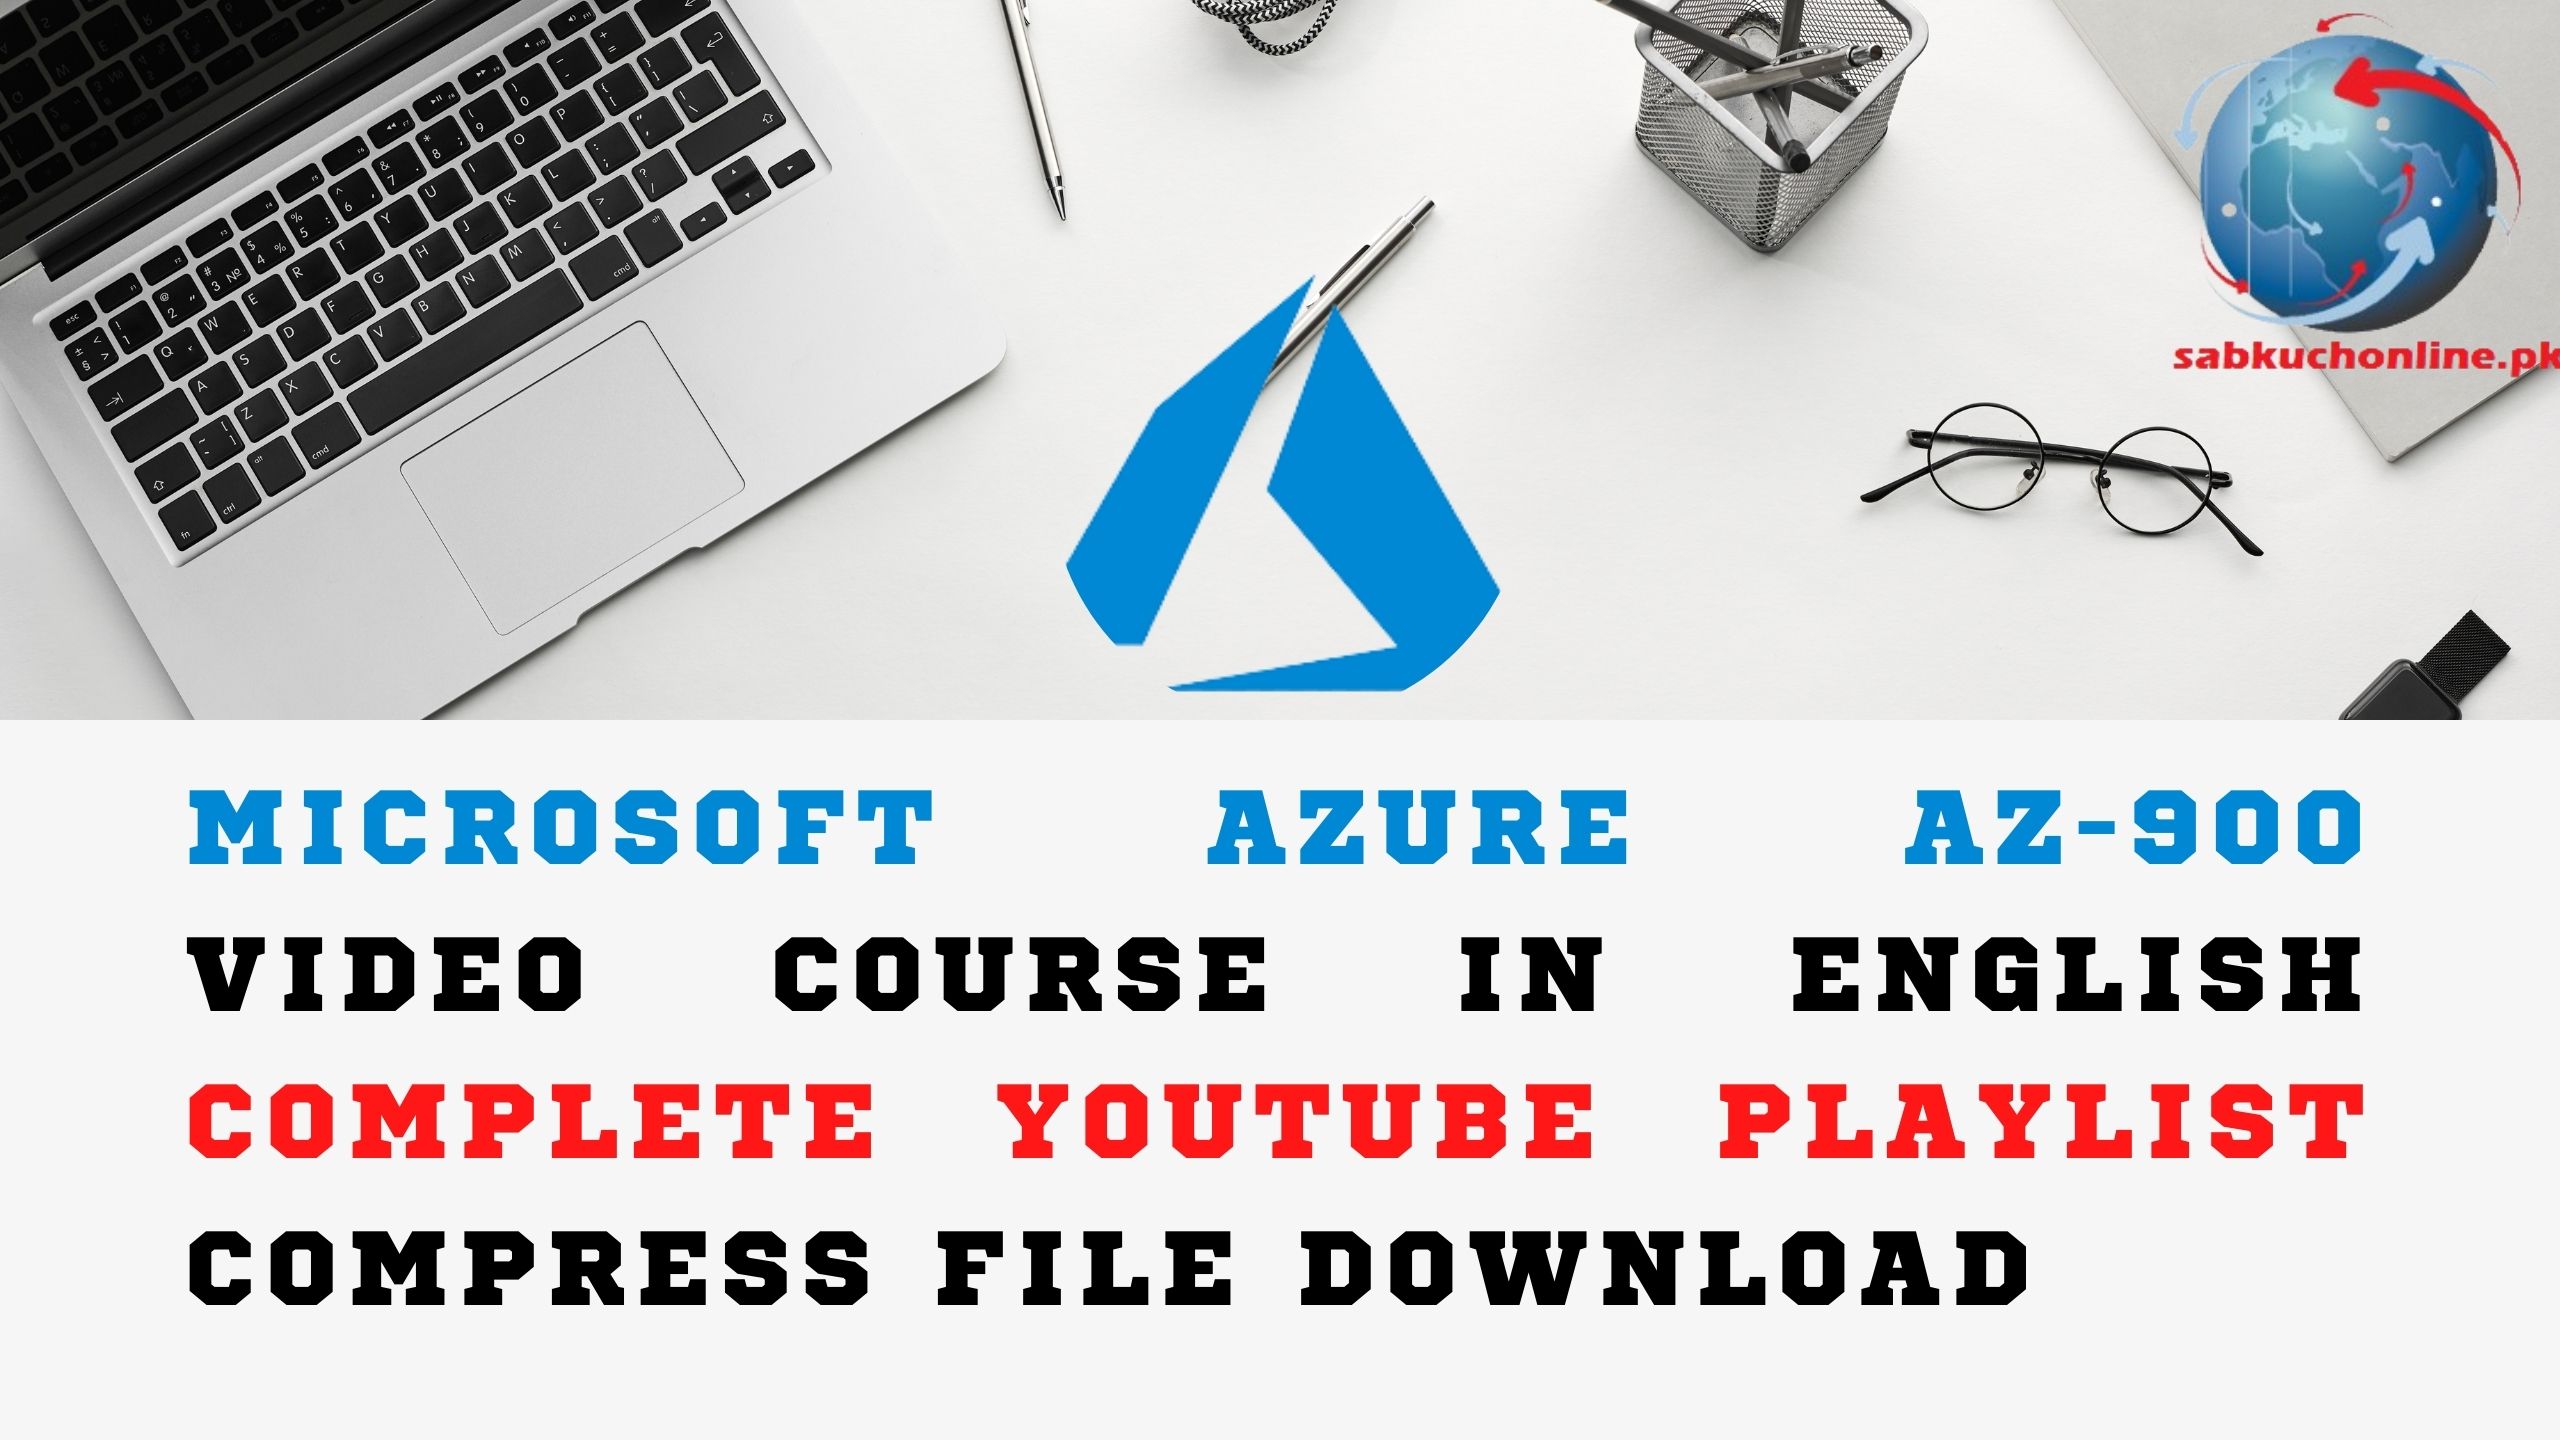 Microsoft Azure AZ-900 Video Course in English Complete YouTube Playlist Compress File Download